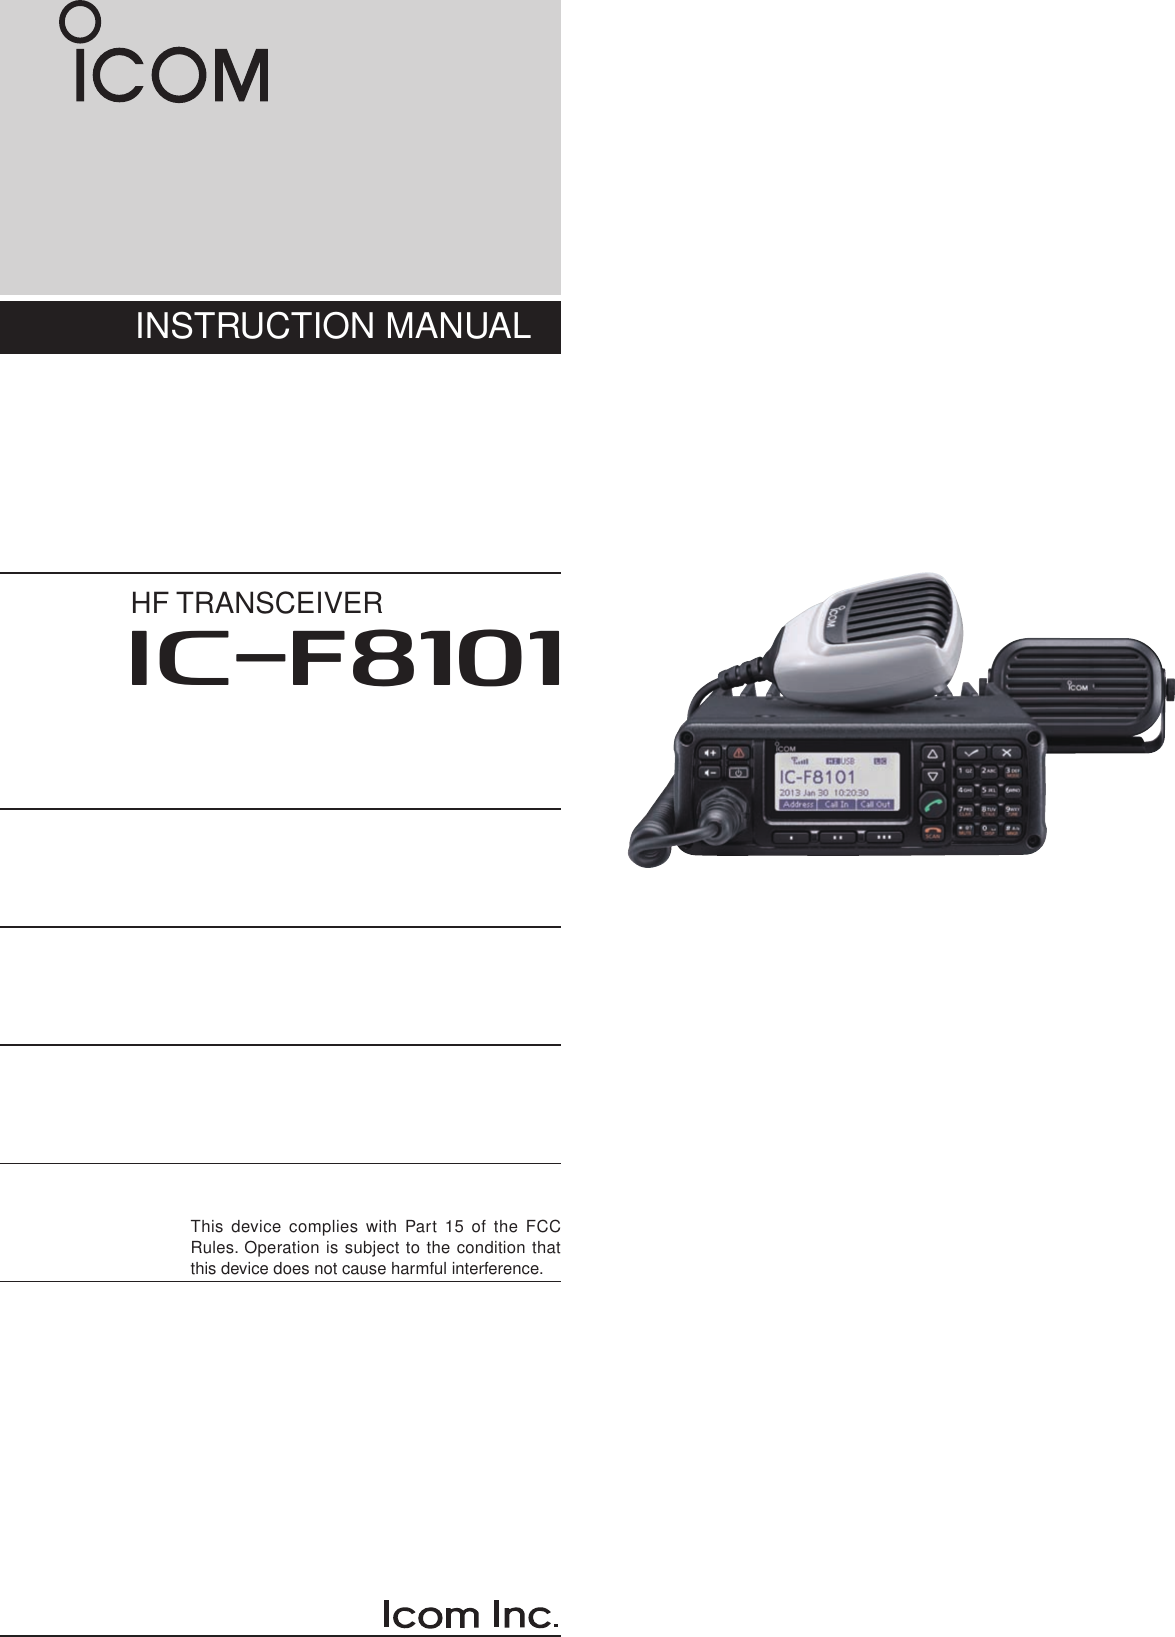 2001 NEWHF TRANSCEIVERiF8101INSTRUCTION MANUALThis device complies with Part 15 of the FCC Rules. Operation is subject to the condition that this device does not cause harmful interference.